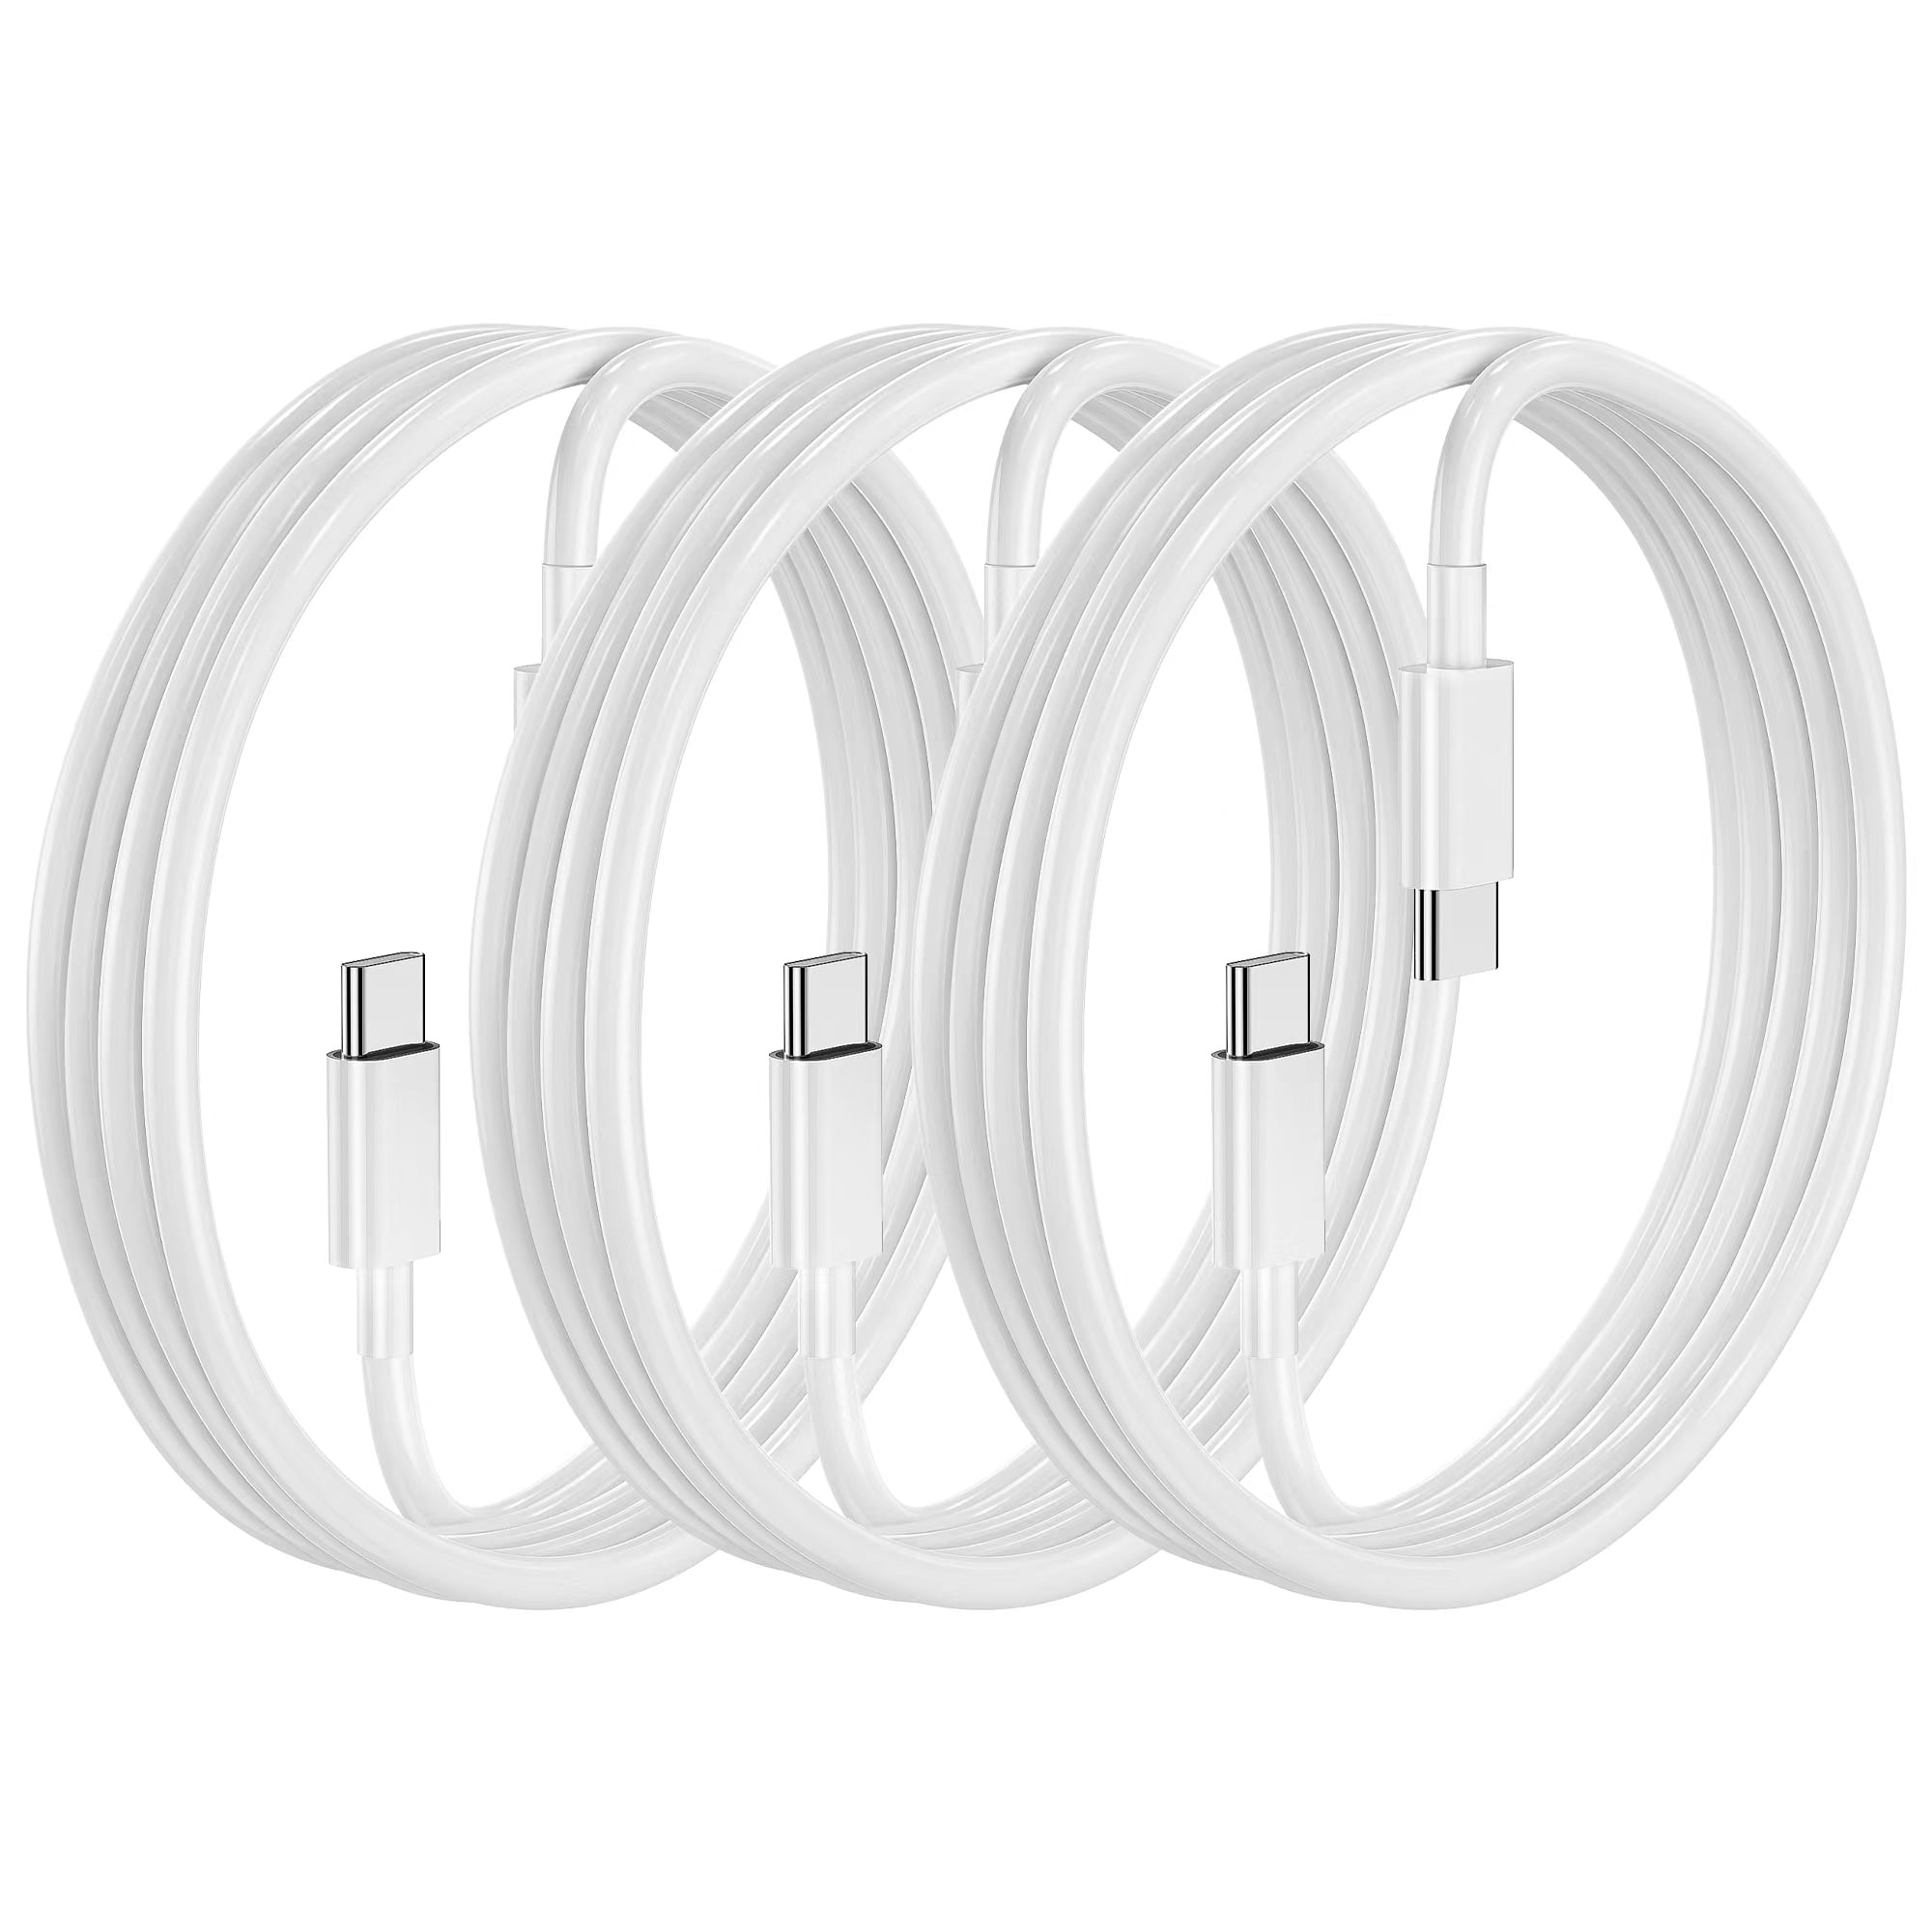 Perfect Length 6ft 3-Pack USB C to USB C Charging Cable, goldove 60W Charger Cord